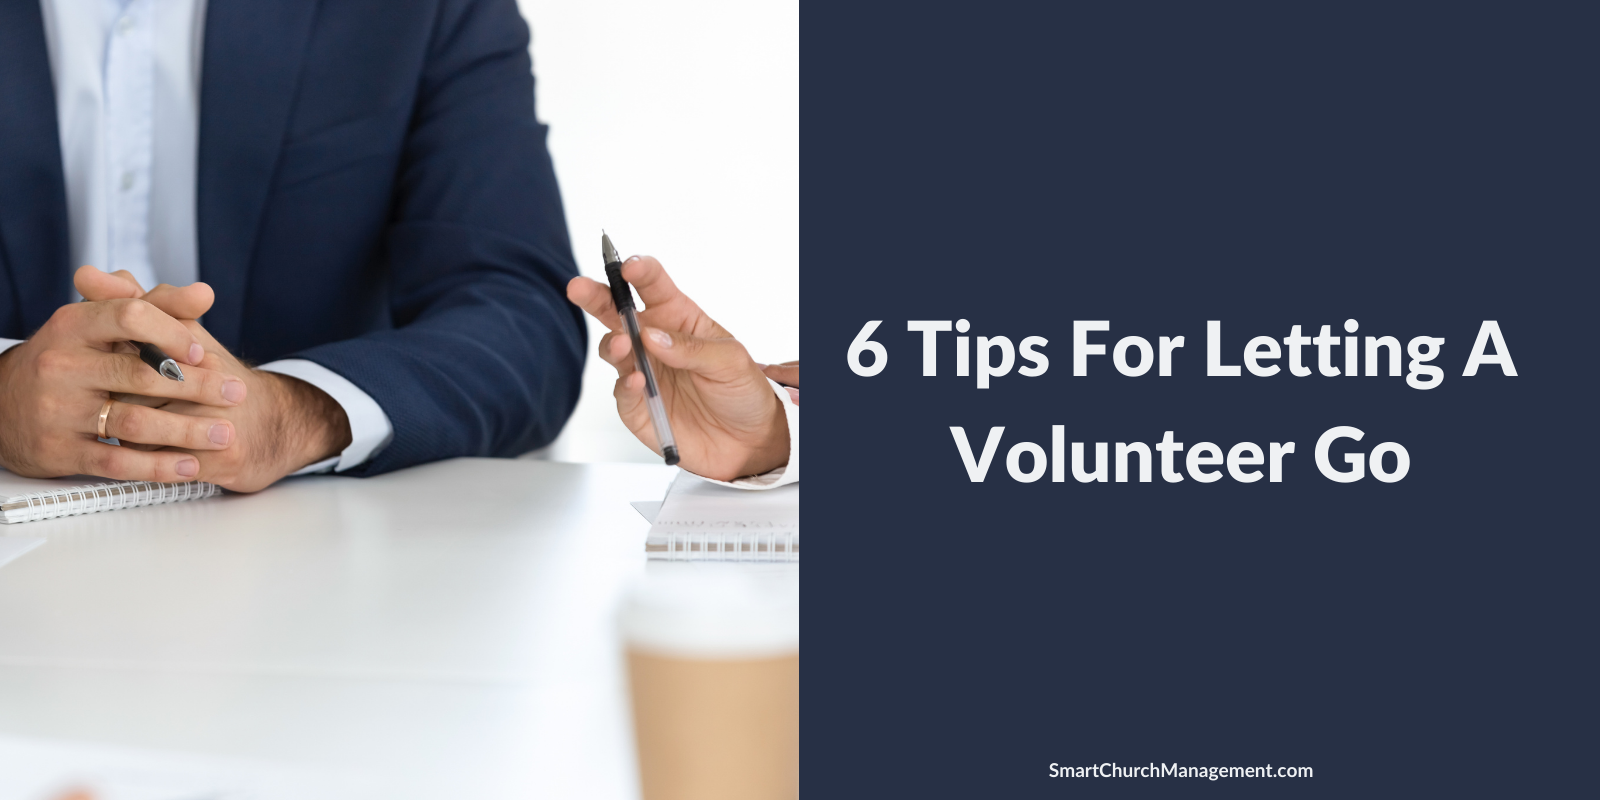 tips for letting a volunteer go - how to fire a volunteer